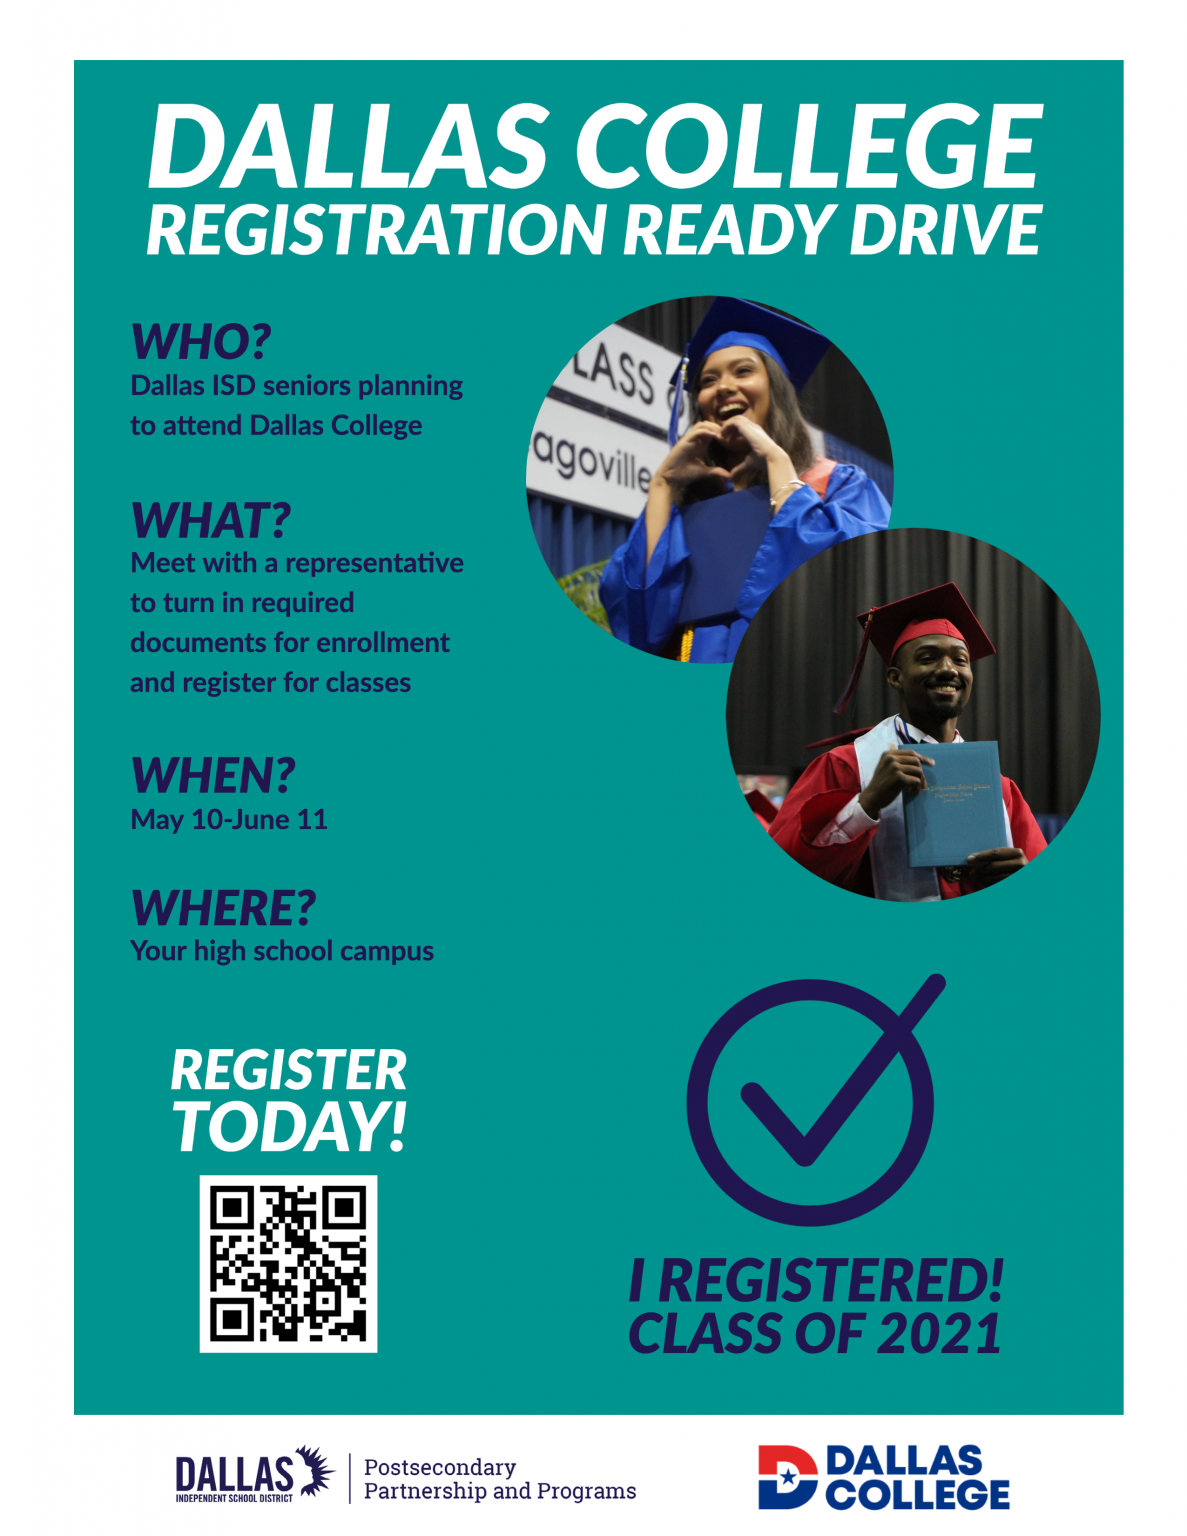 College registration events available to Dallas ISD seniors planning to